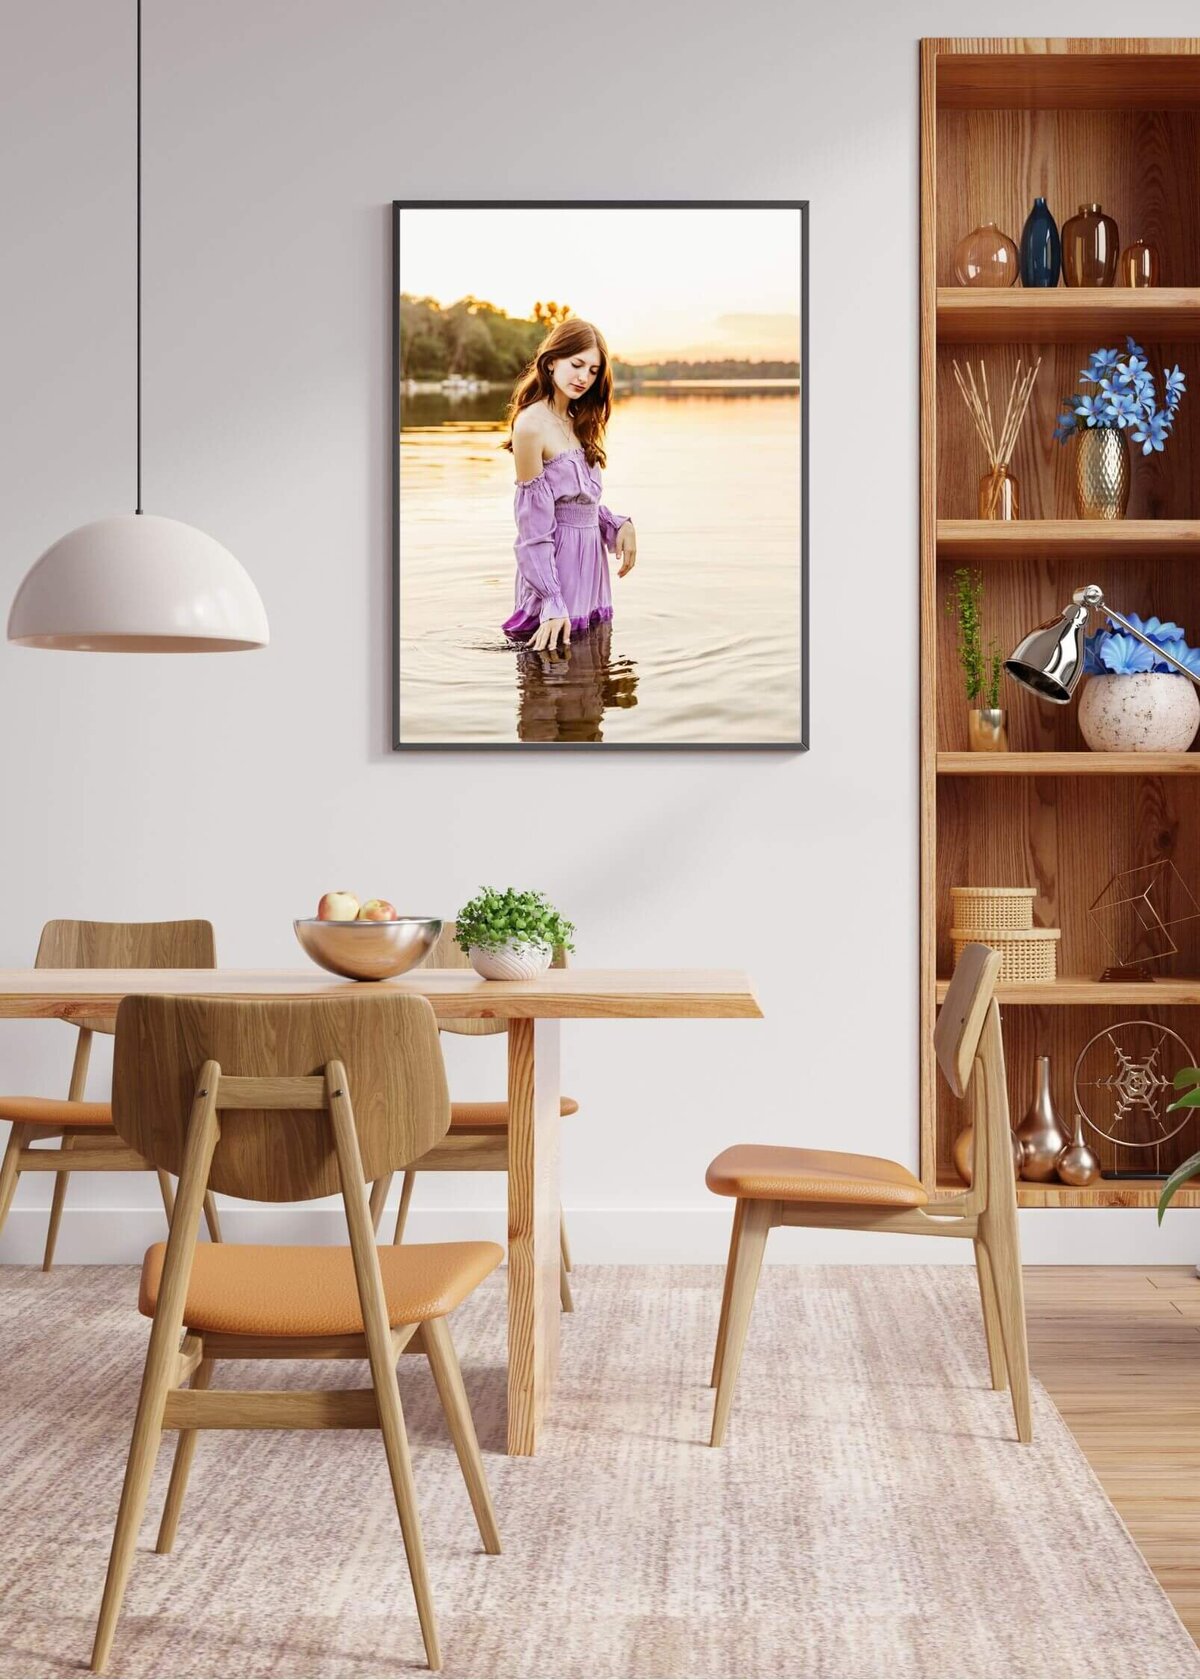 gorgeous dining room area with a beautiful senior photo captured by Ashley Kalbus hanging on the wall